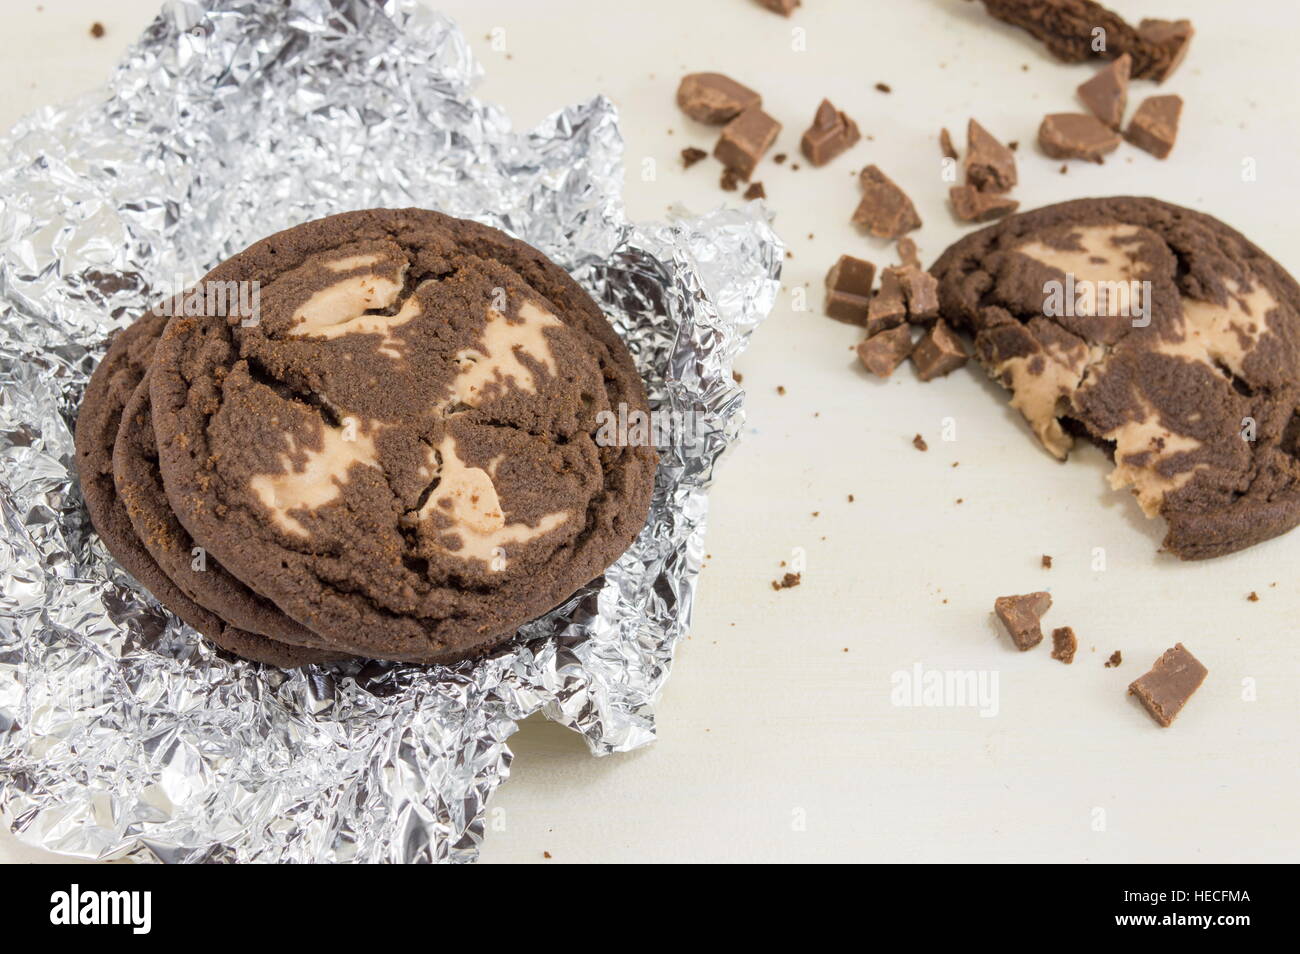 Chocolate chip brown cookies on aluminum foil Stock Photo